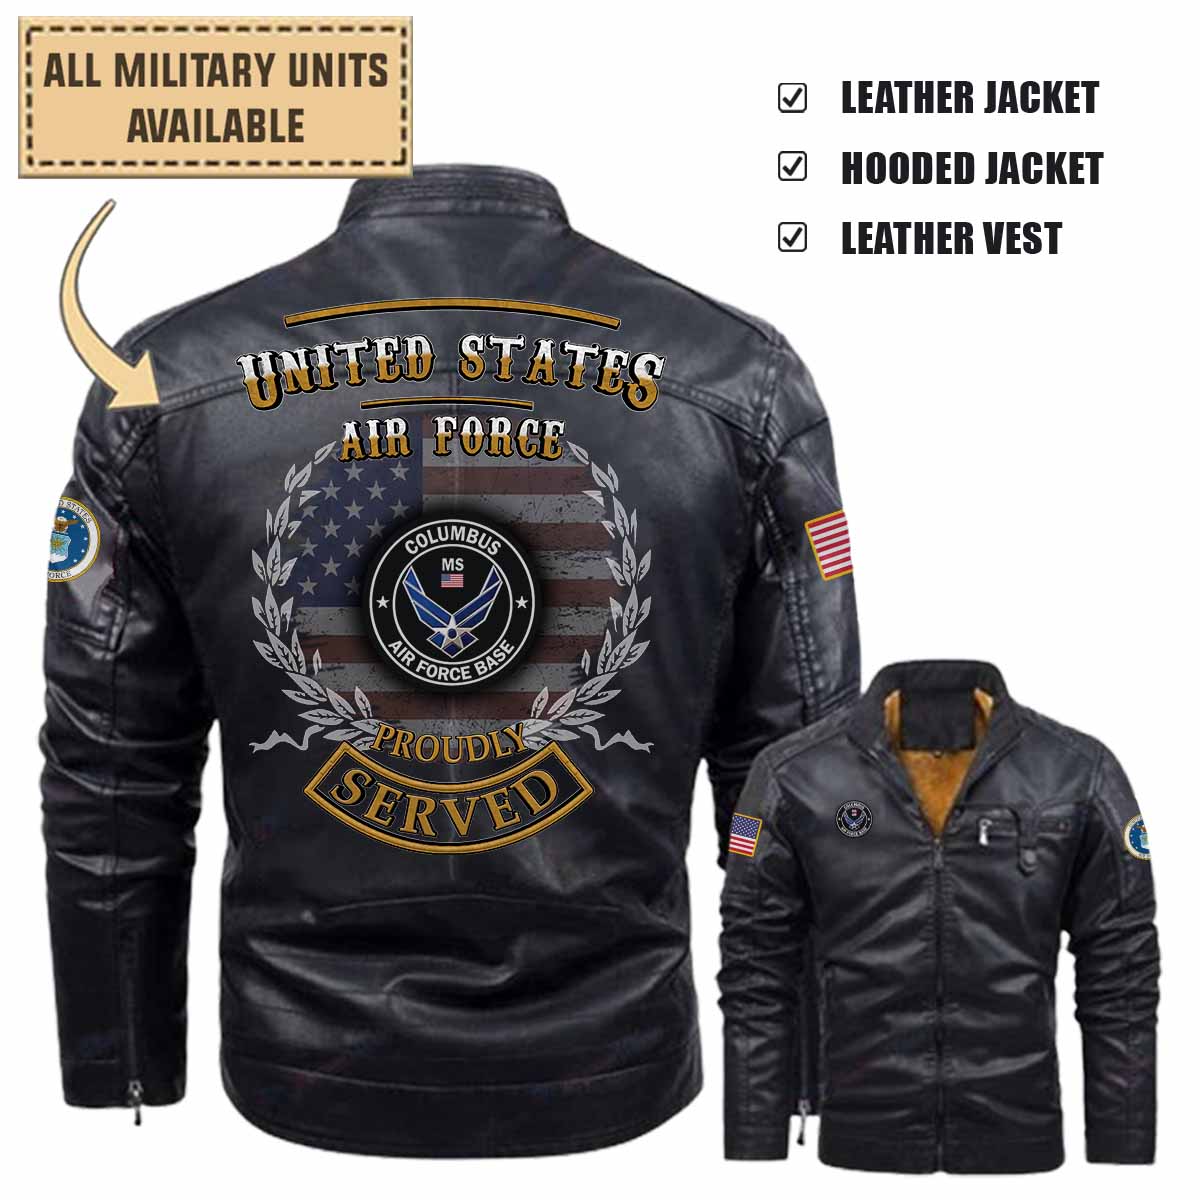 Columbus AFB Air Force Base_Leather Jacket and Vest